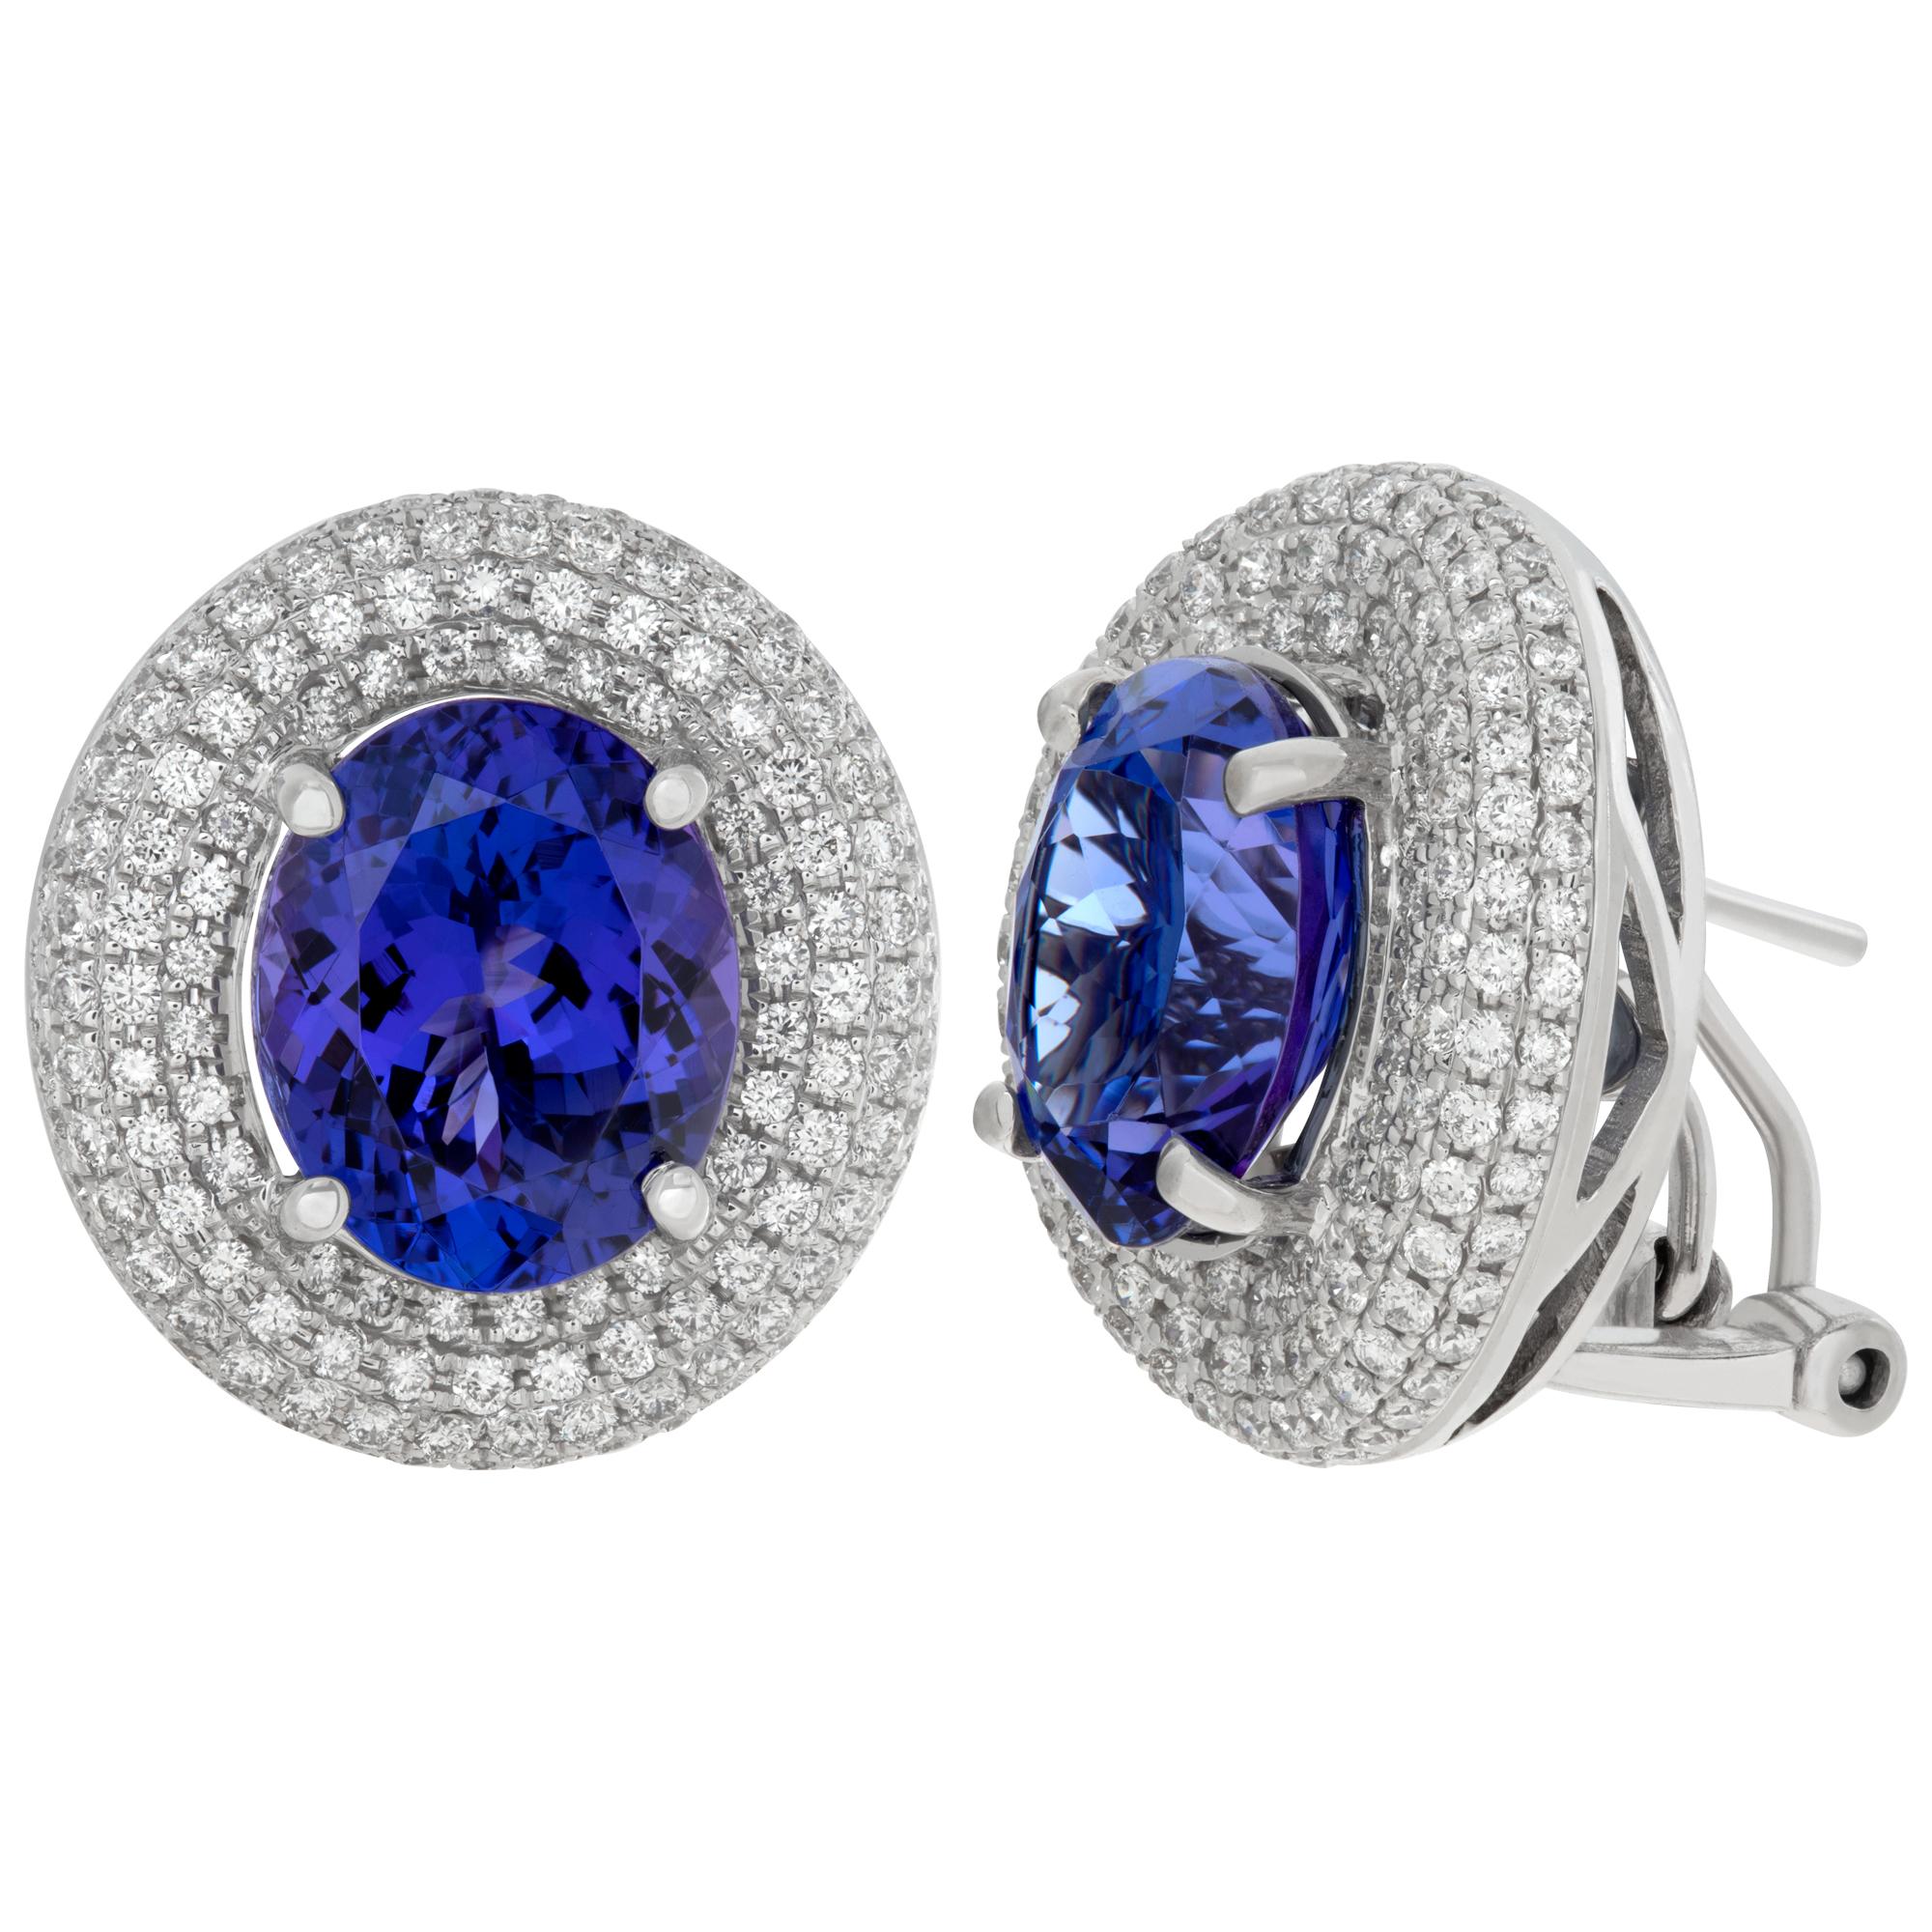 Tanzanite and diamond earrings with 1.19 carats in pave set G-H color, VS-SI clarity diamonds and 7.15 carats in oval tanzanites. 16.5 mm x 17.5 mm.